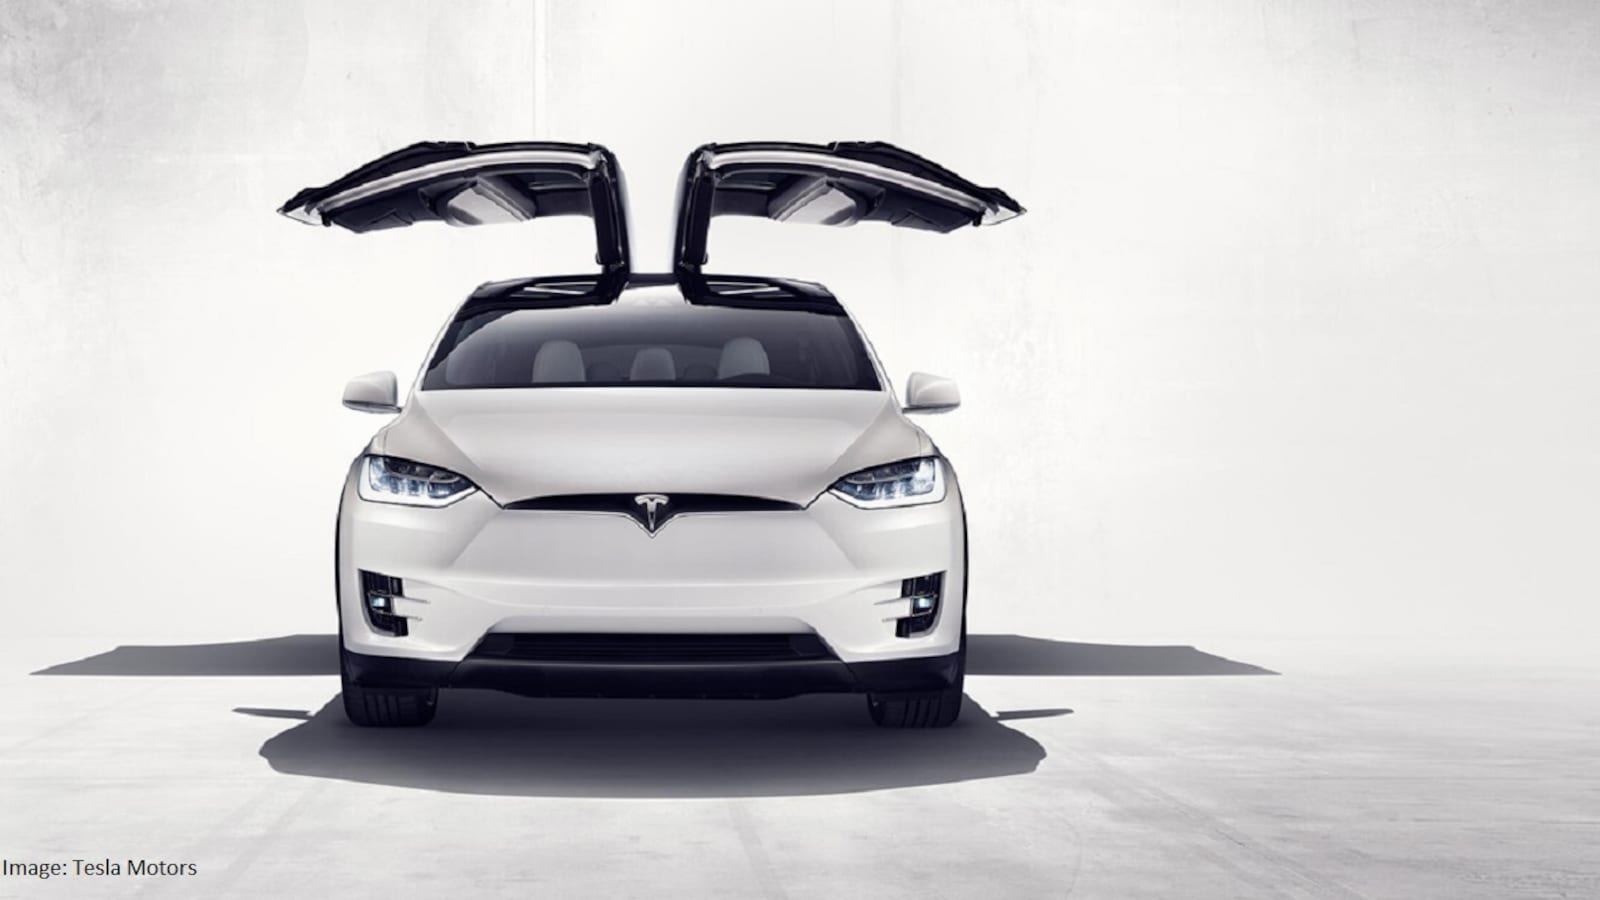 Take a look at the India-bound cars from Tesla